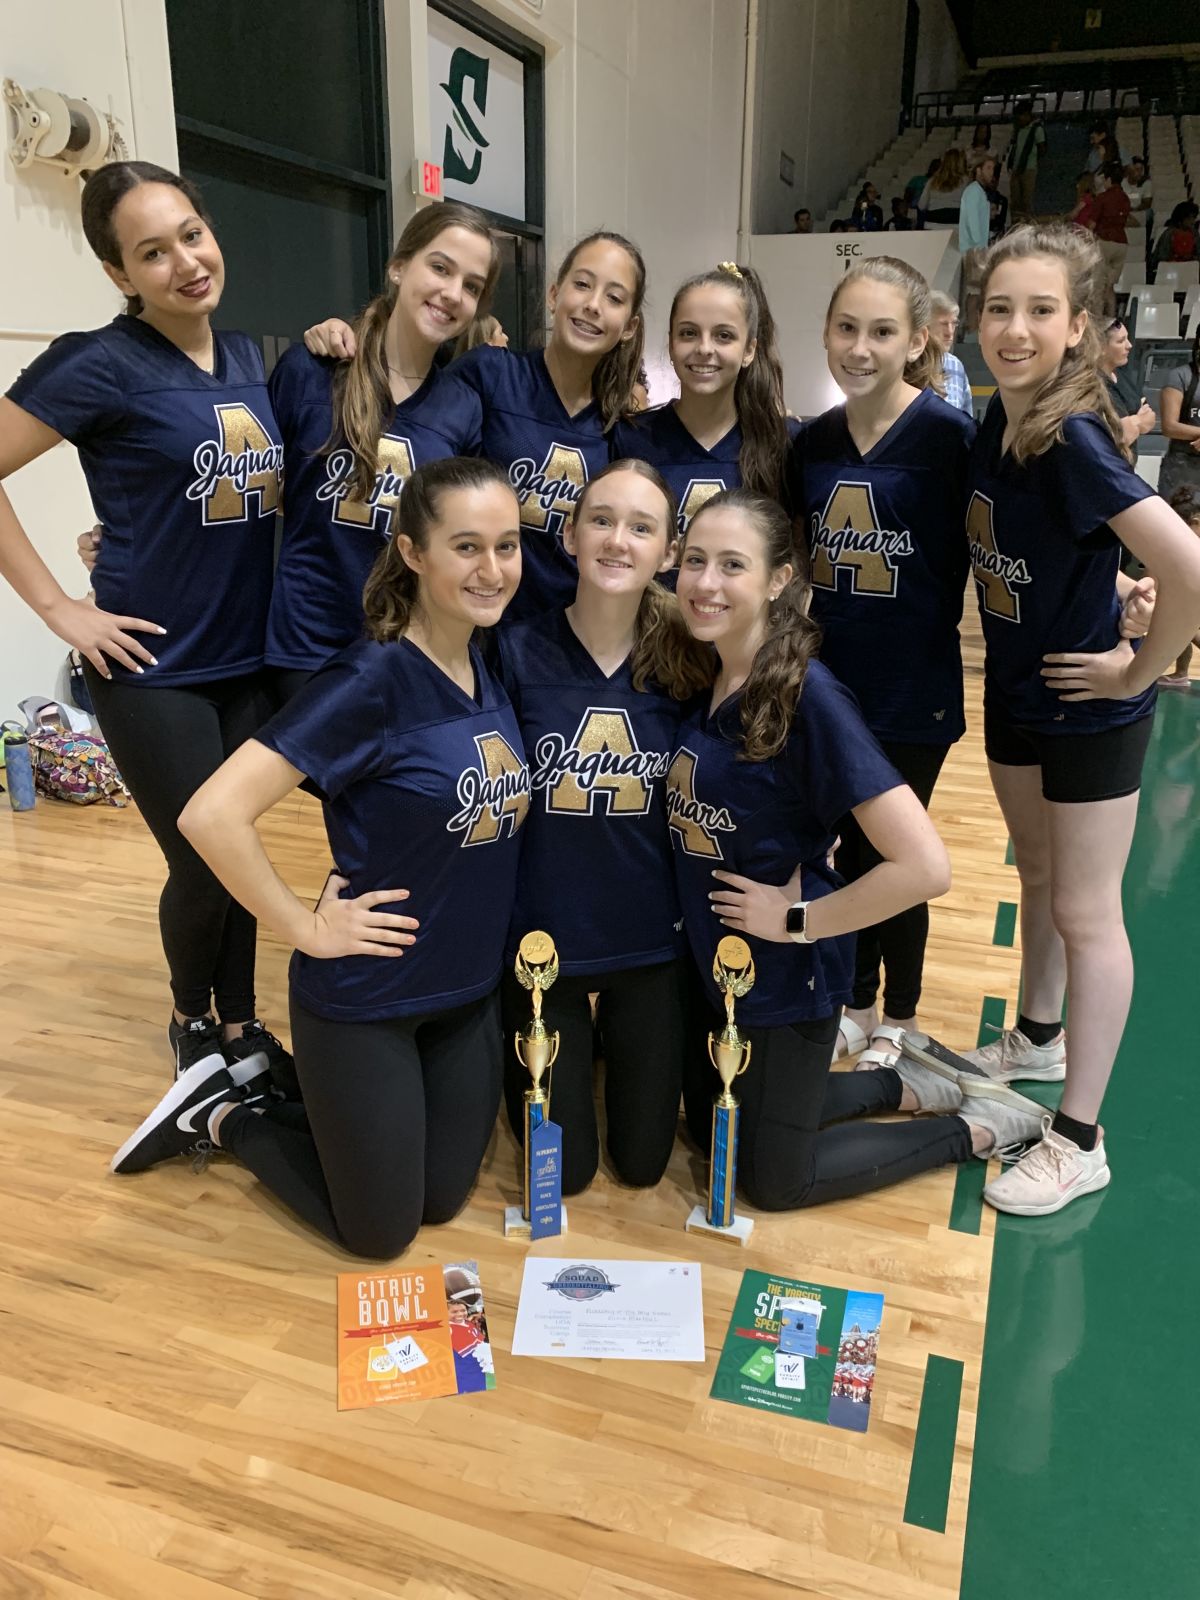 Jaguarettes Attend Dance Camp Post Details Academy of the Holy Names